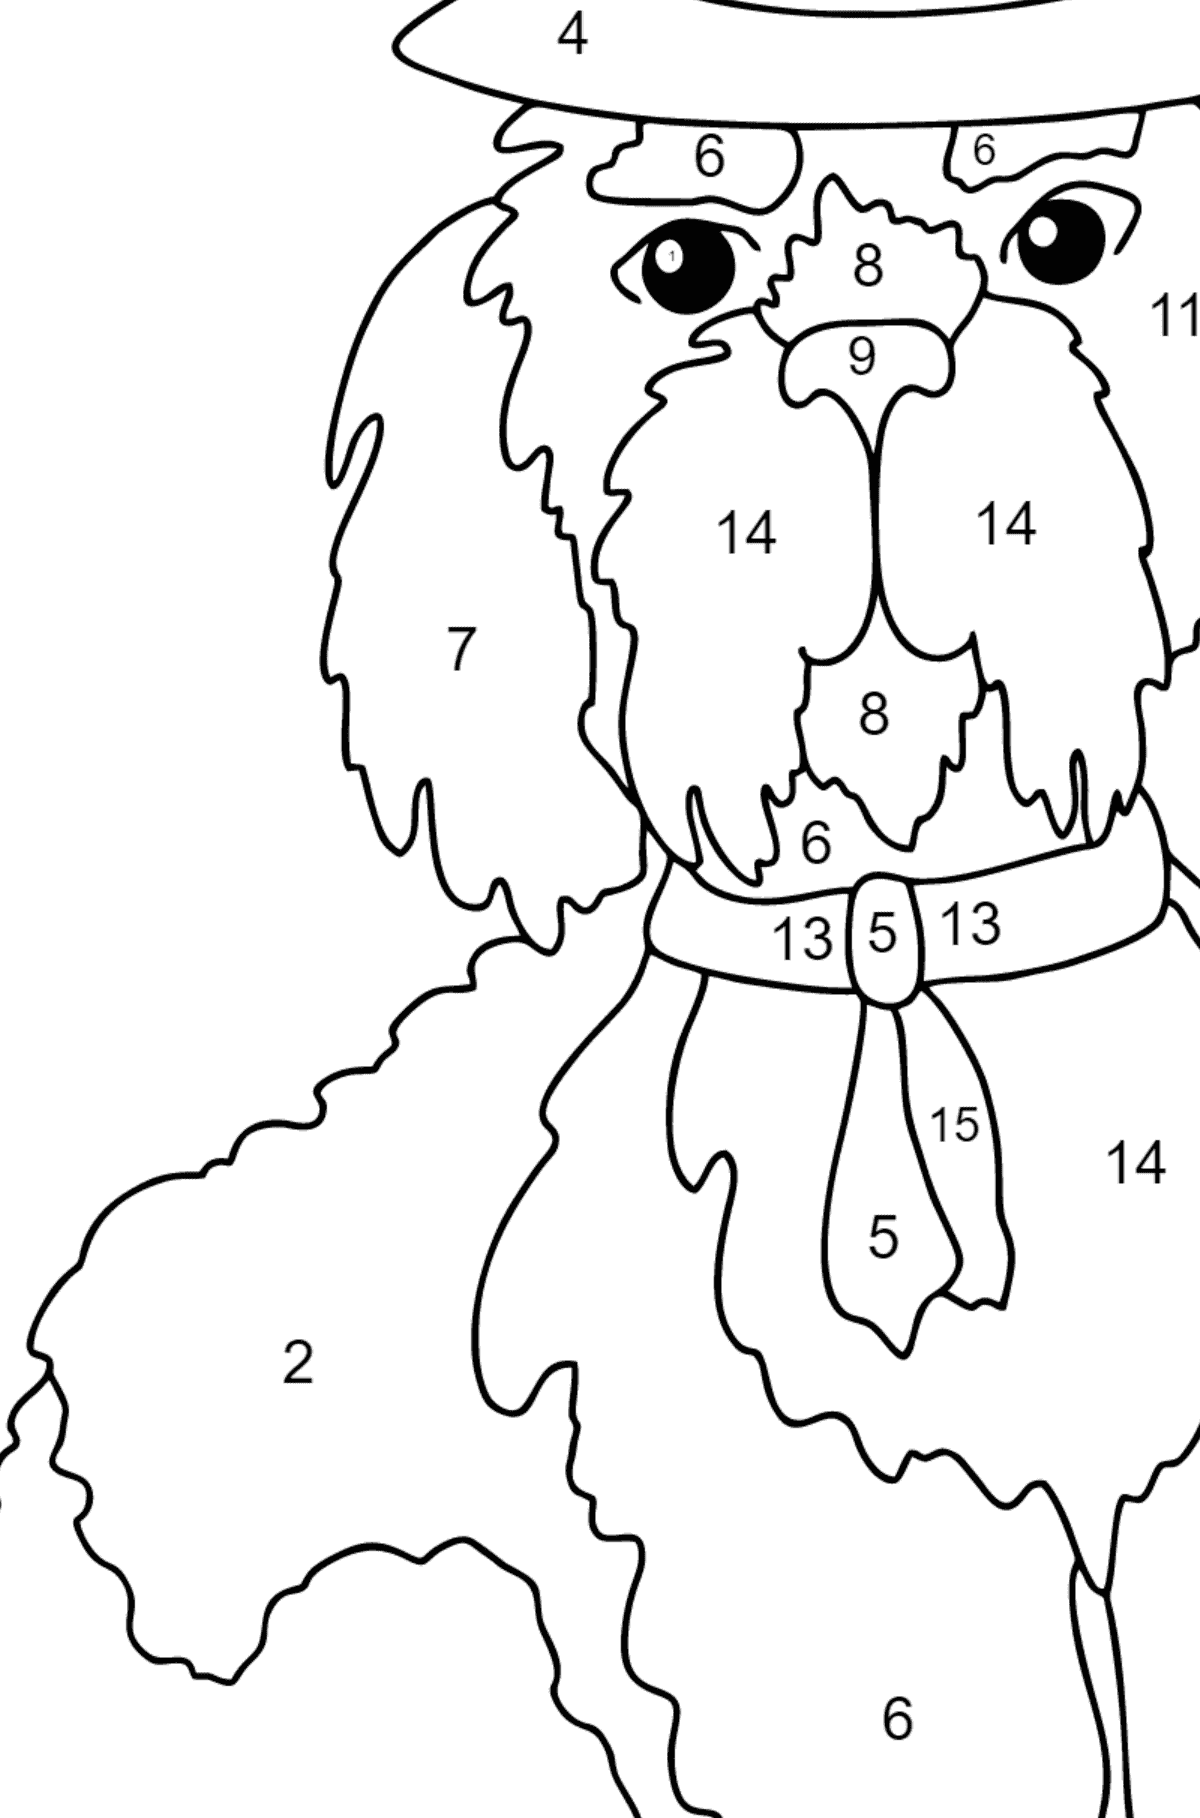 Coloring Page - A Dog in a Fancy Hat for Children  - Color by Number